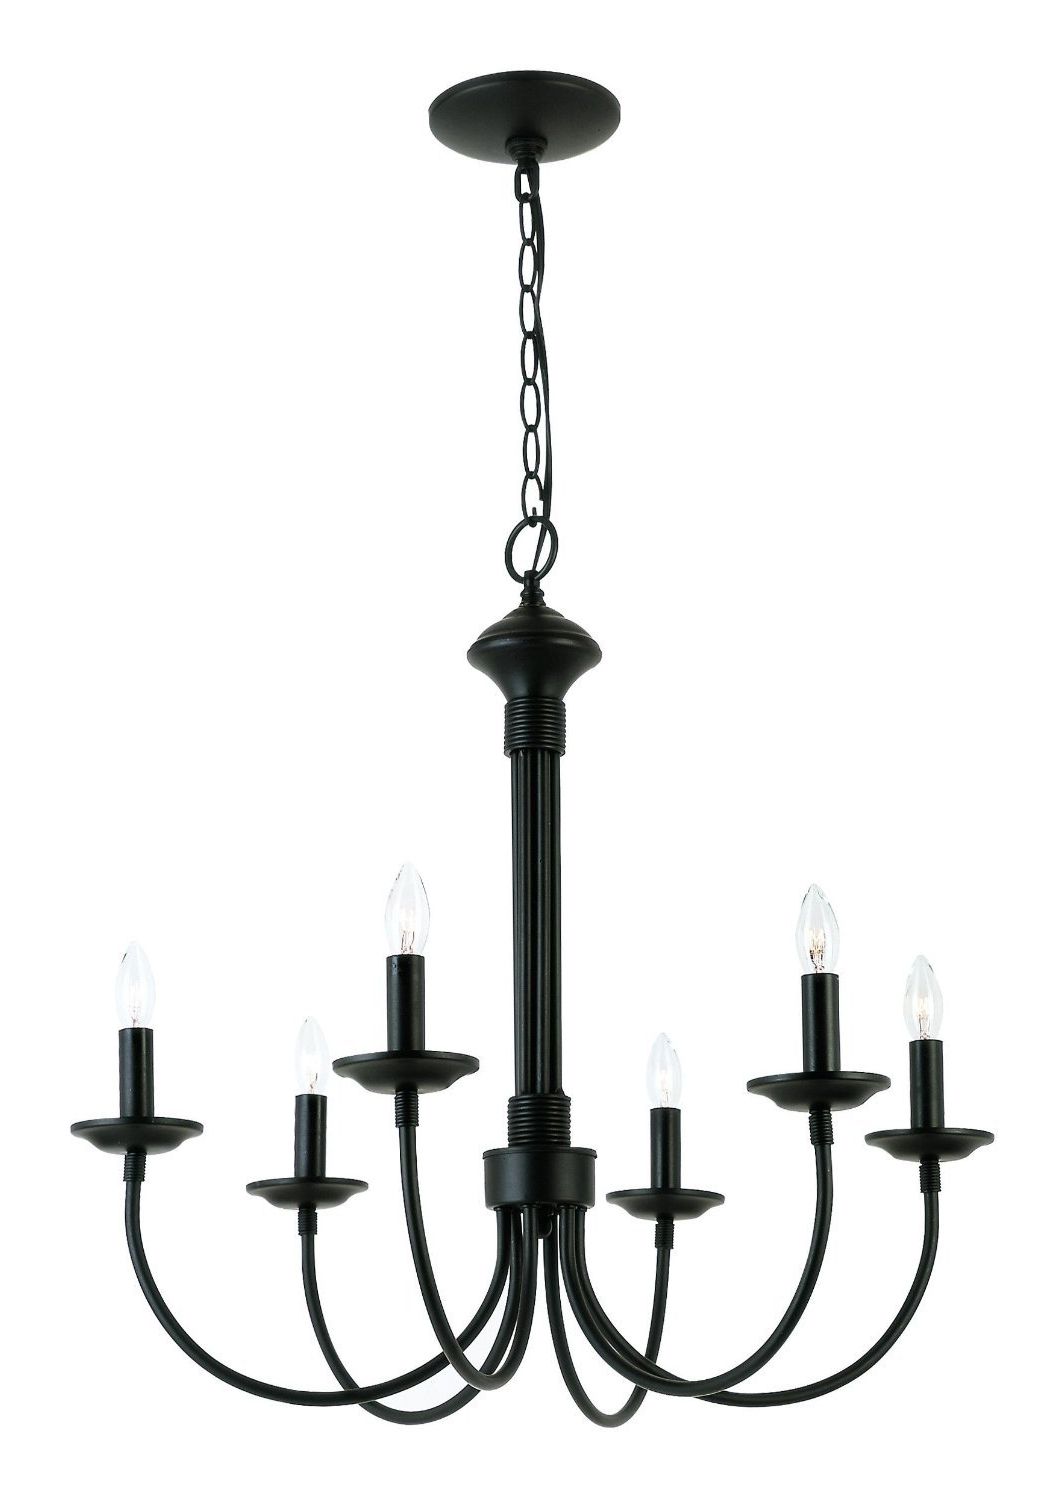 Shaylee 6 Light Candle Style Chandelier Pertaining To Well Known Perseus 6 Light Candle Style Chandeliers (View 6 of 25)